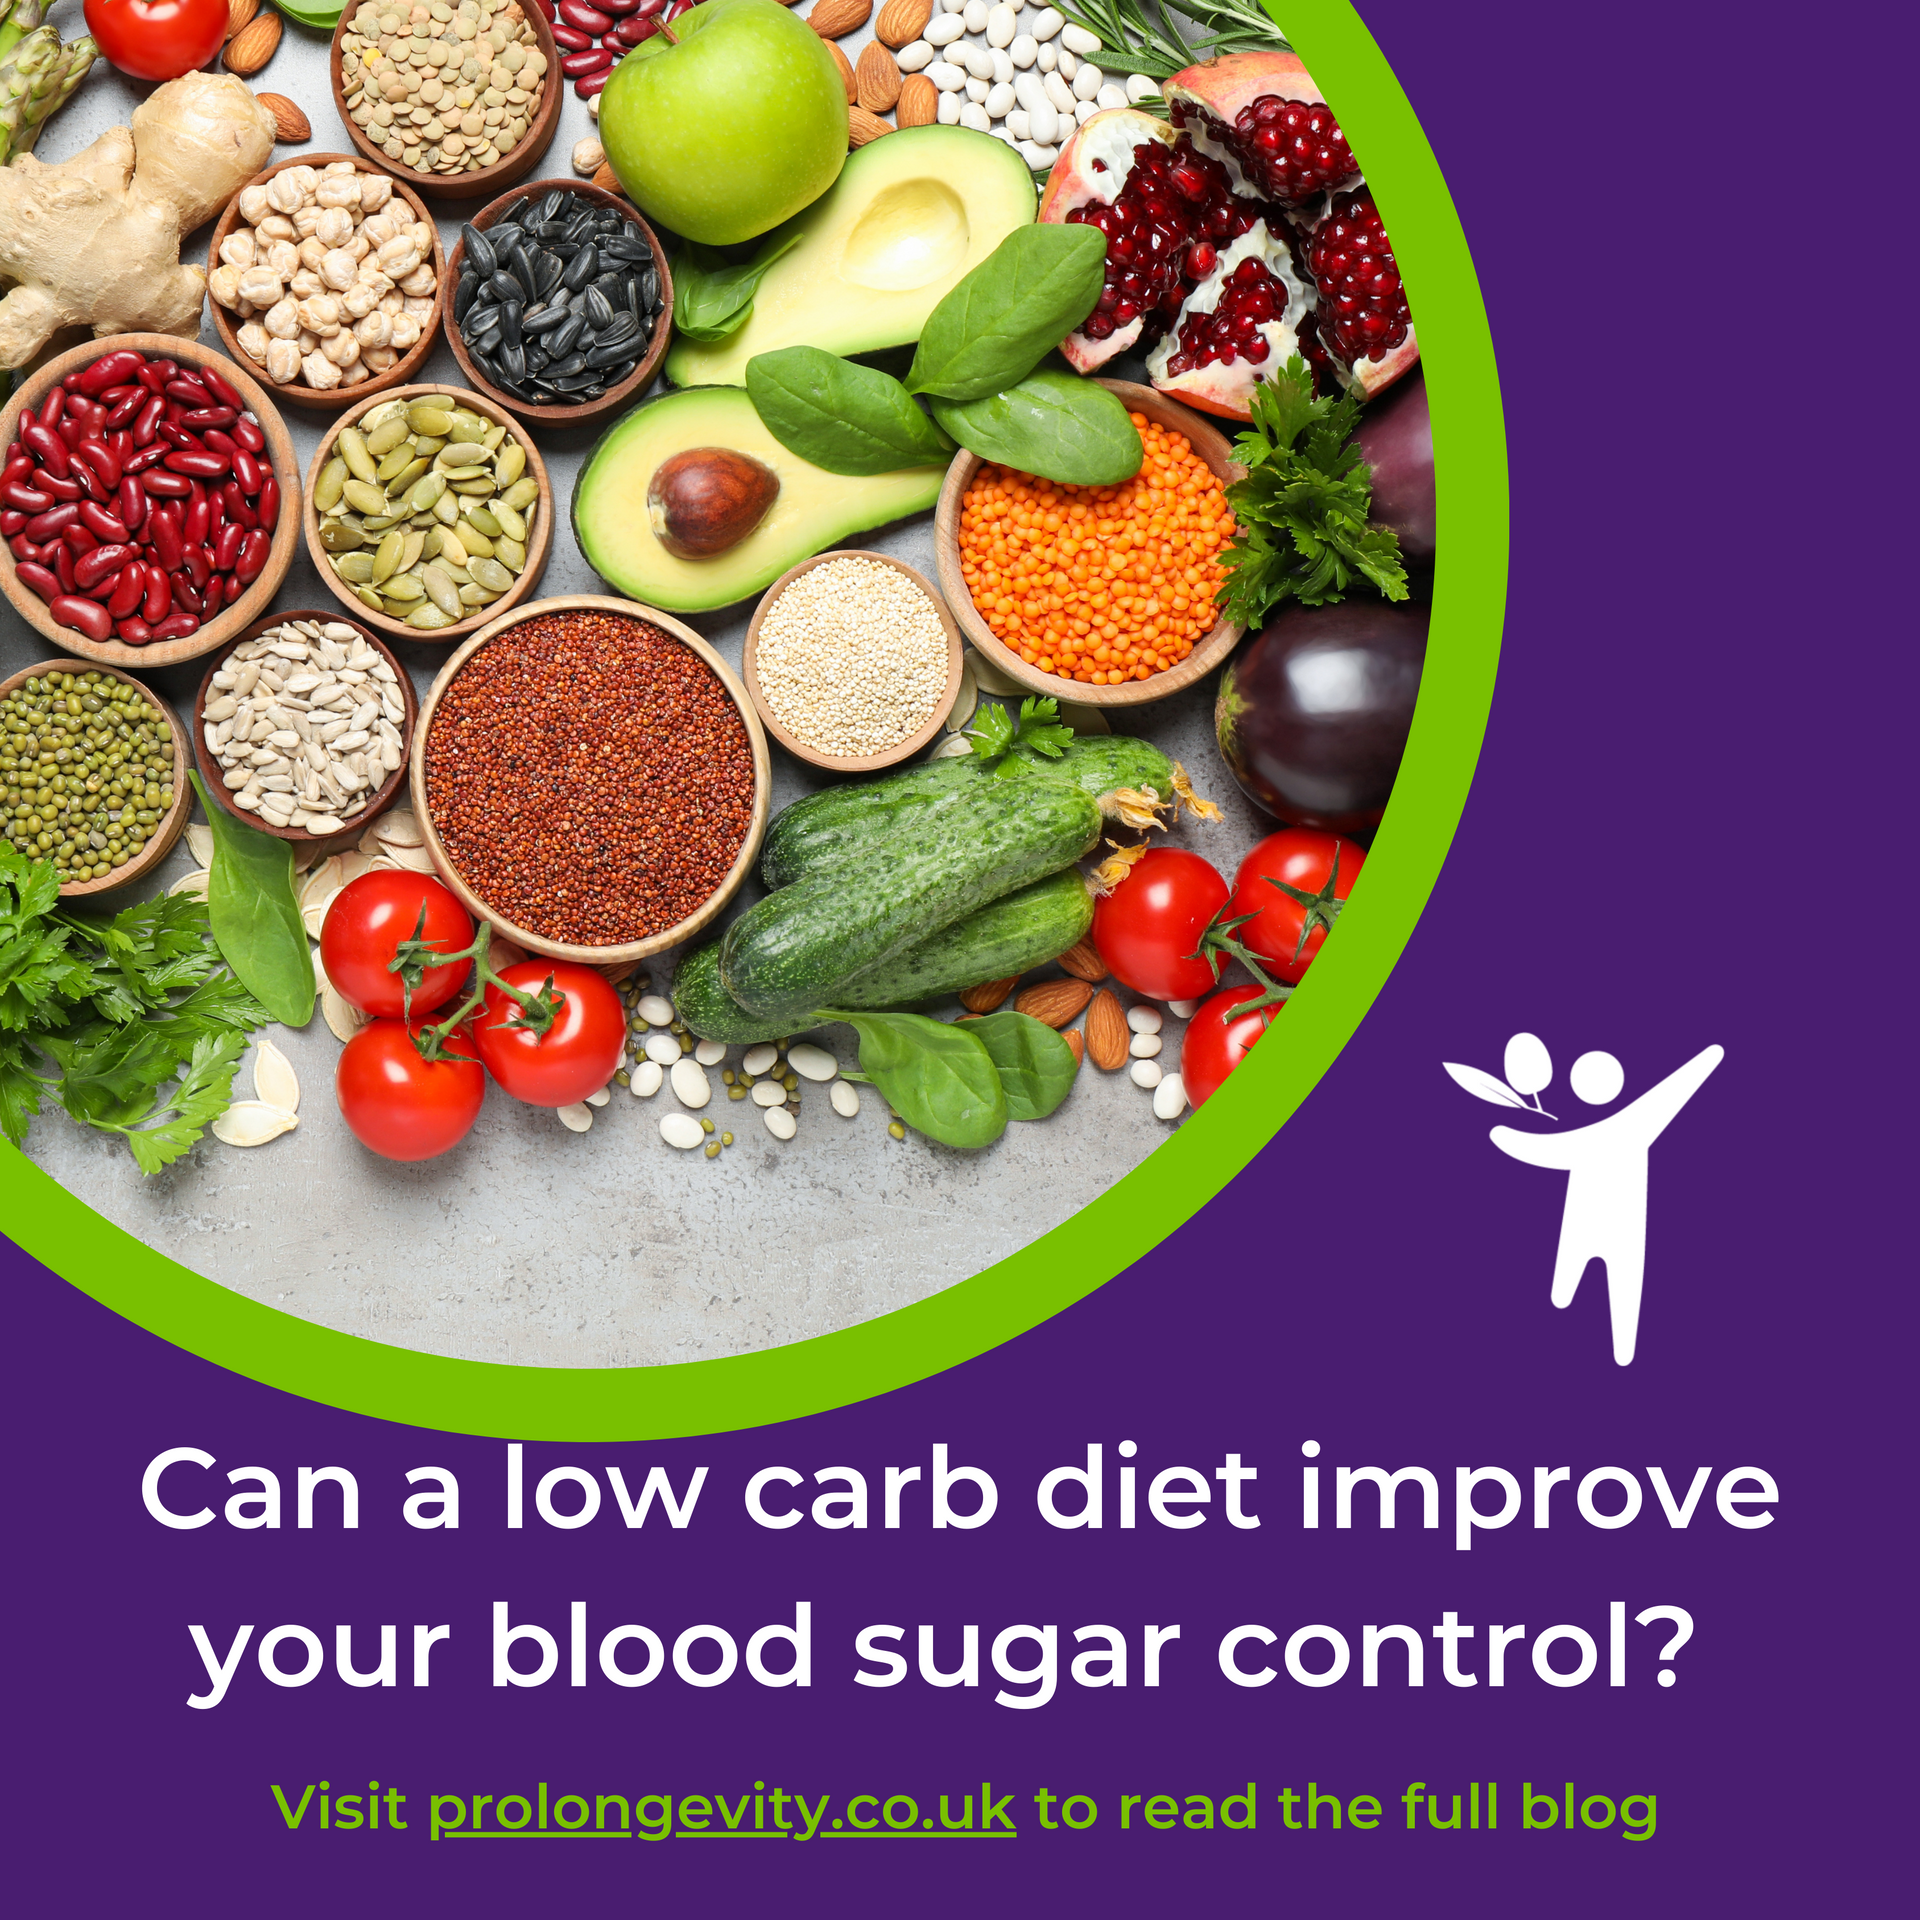 Can a low carb diet improve your blood sugar control?